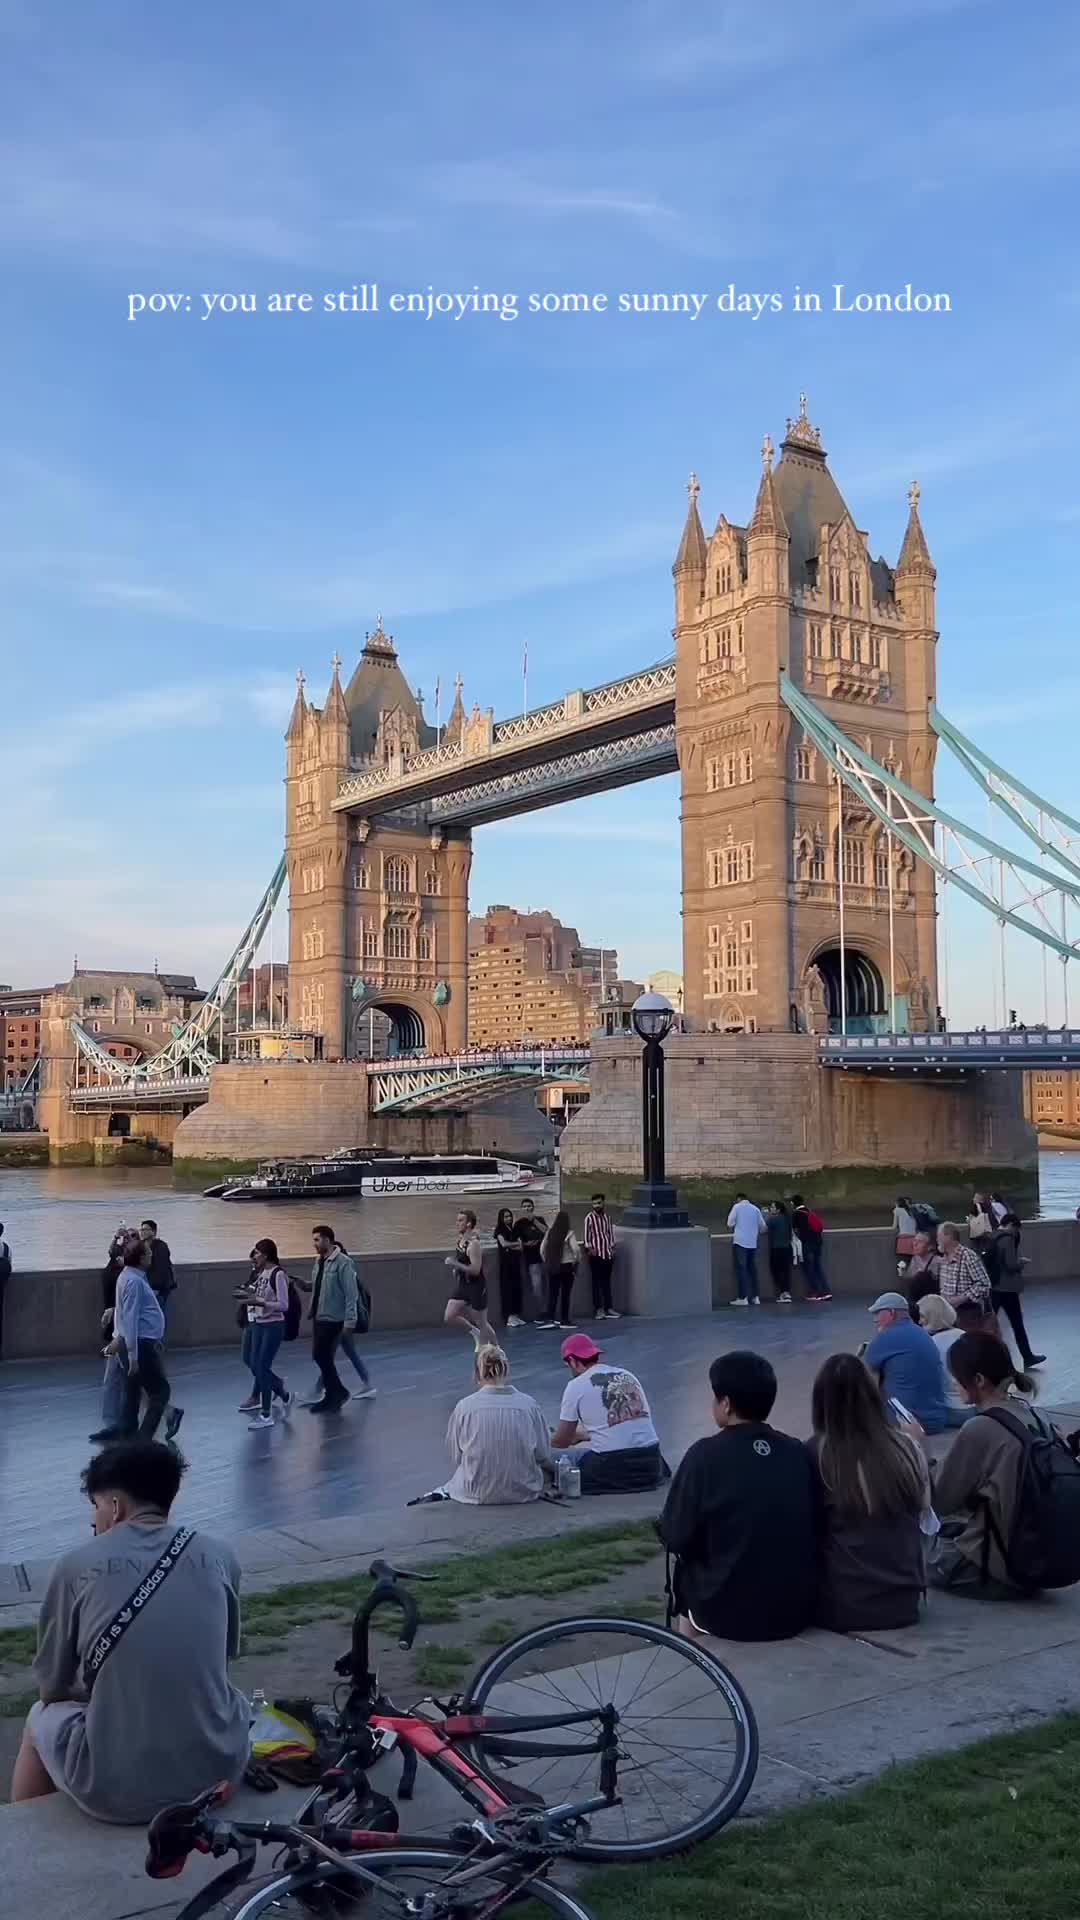 Relax at Potters Field Park with Stunning Tower Bridge Views